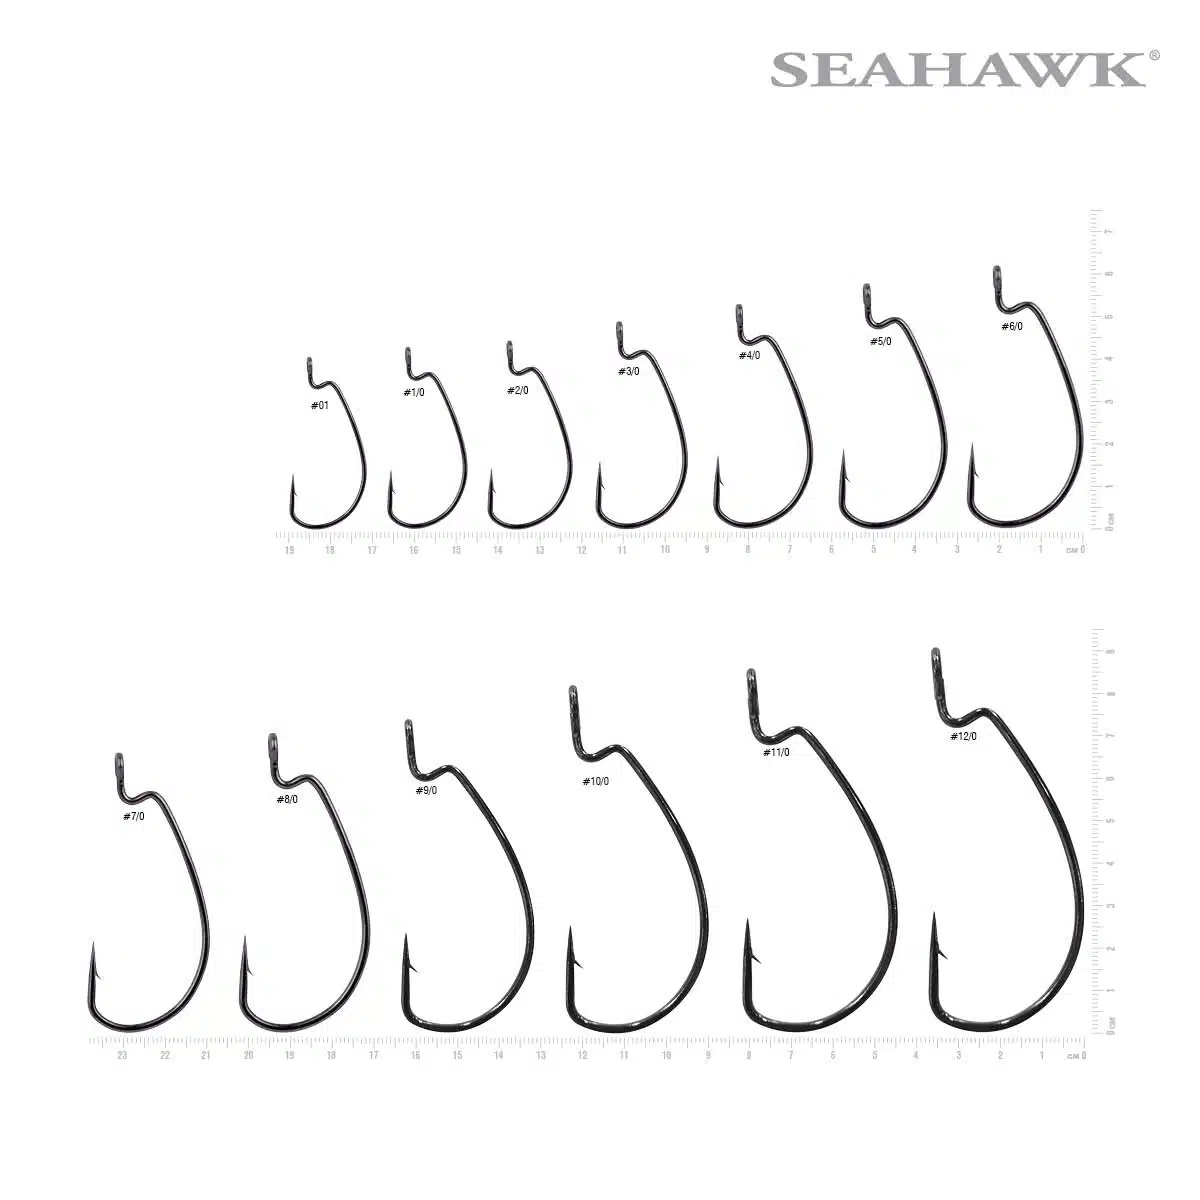 Seahawk Worm Hook 2X Strong - Made in Korea